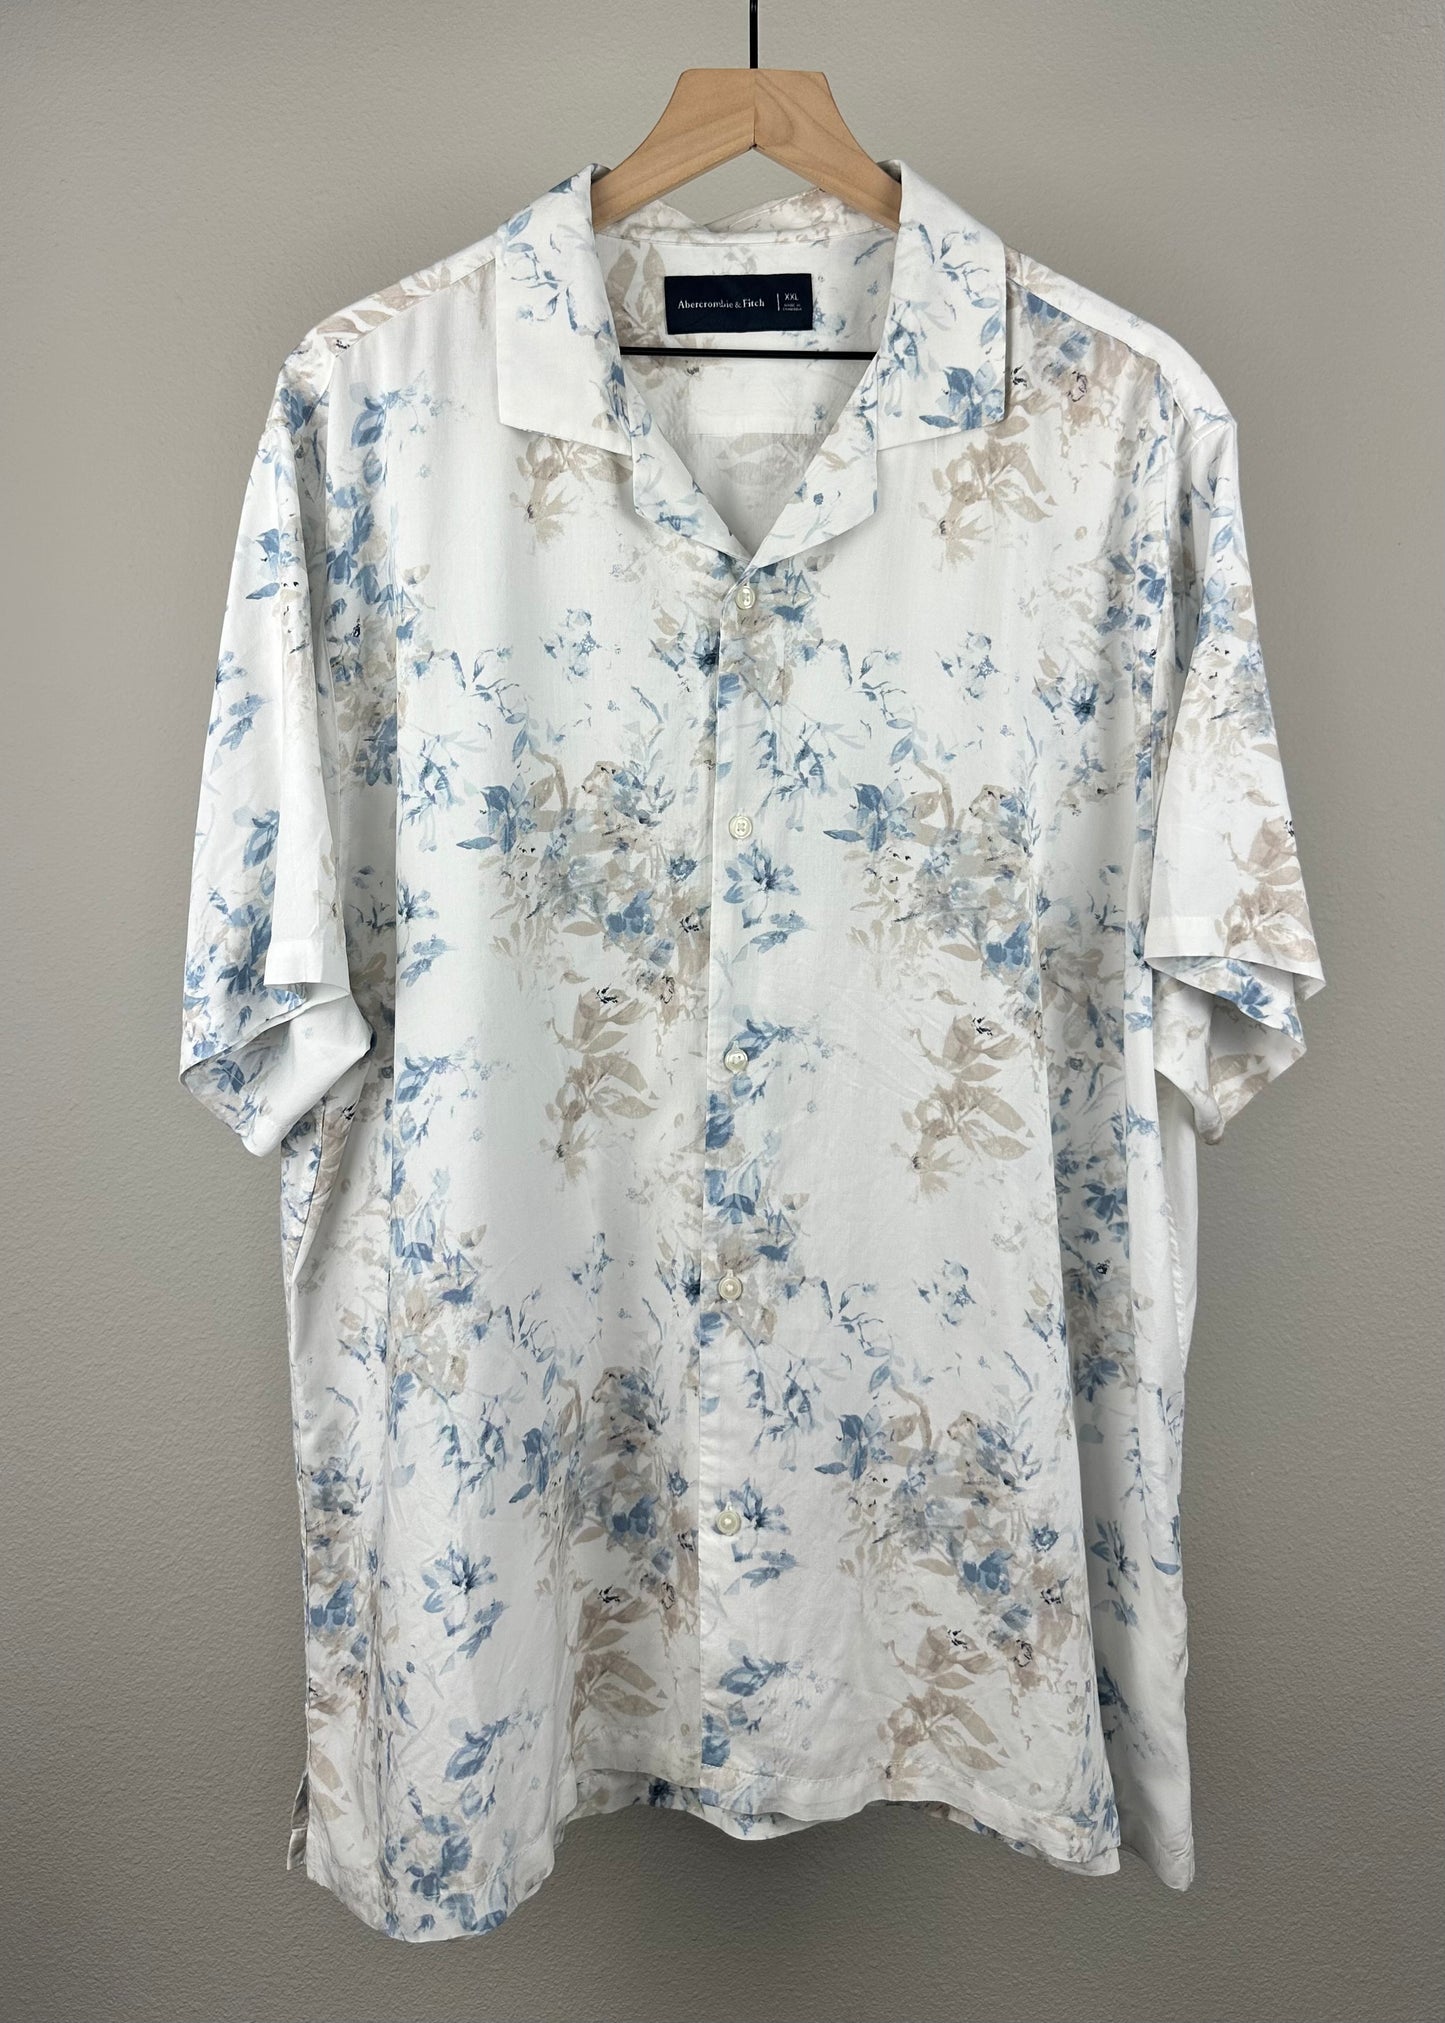 Floral Men’s Shirt by Abercrombie & Fitch